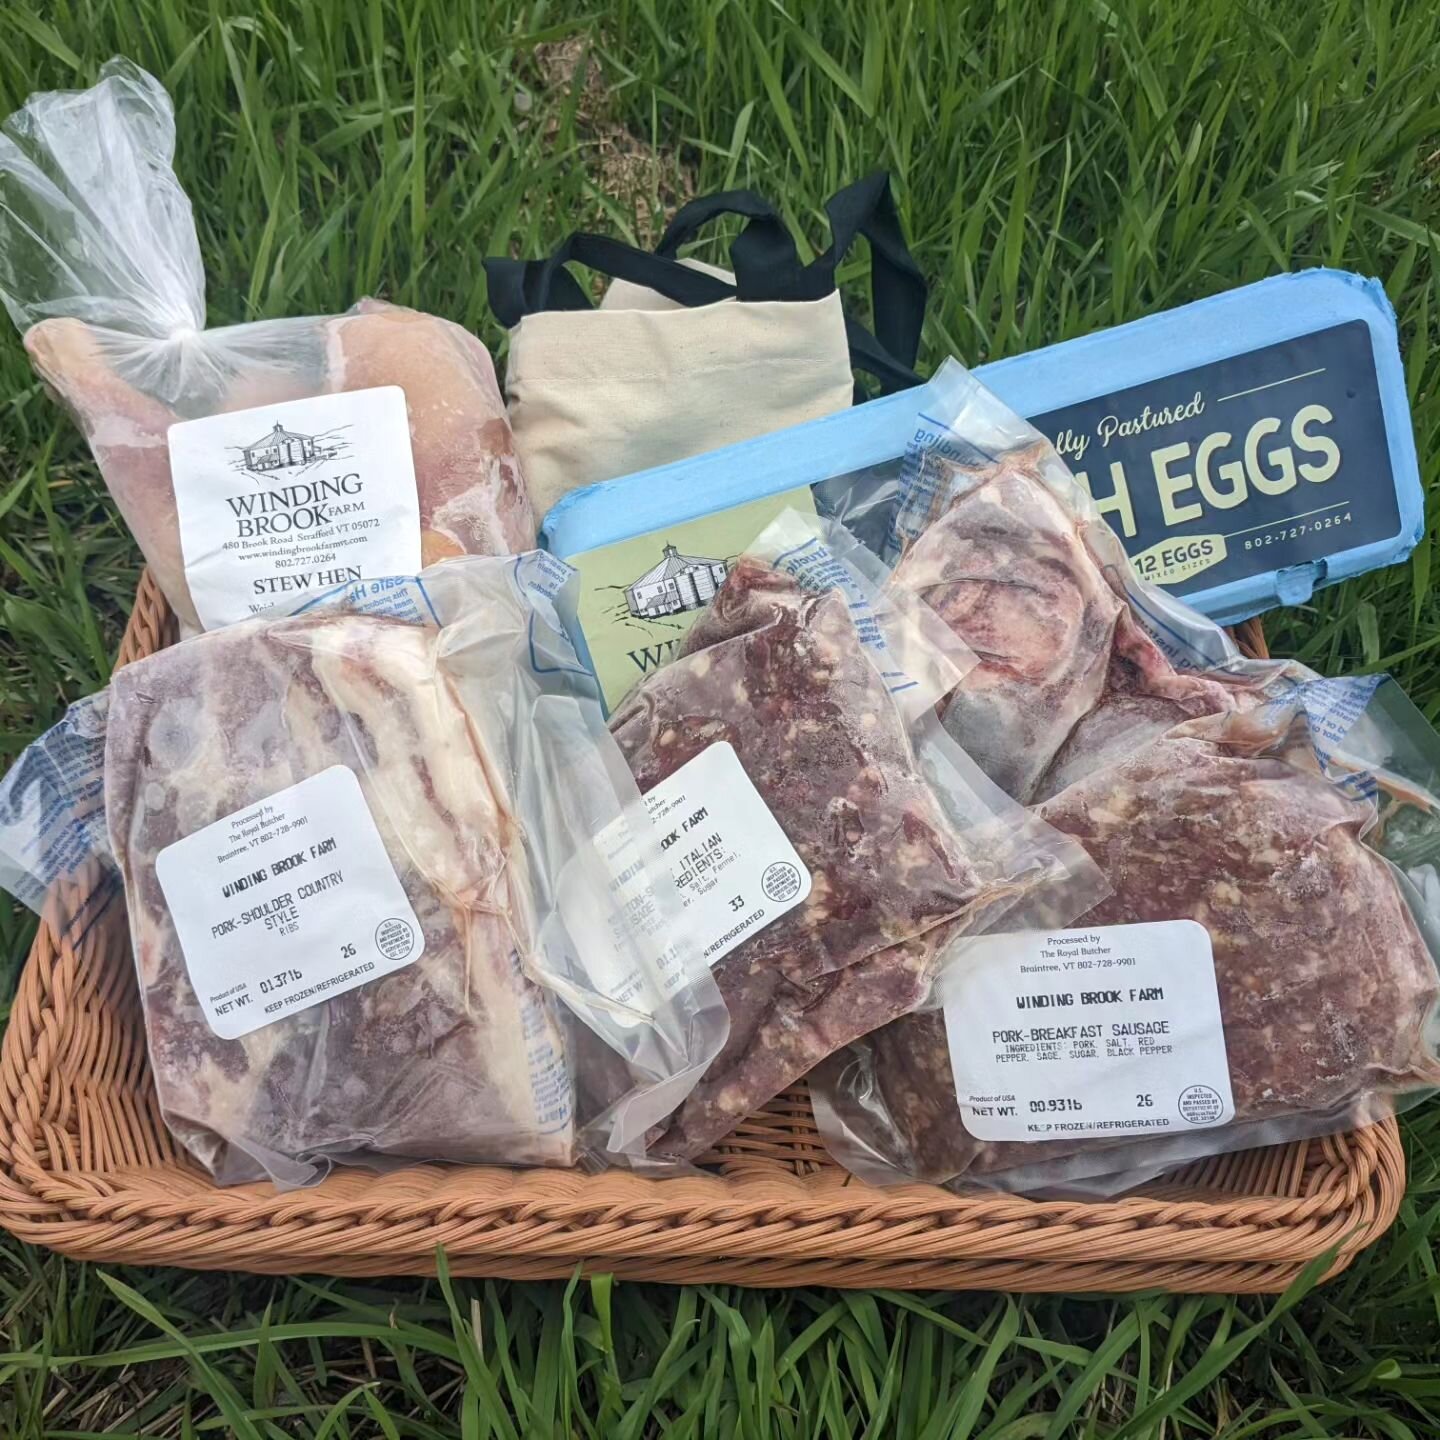 Now offering weekly specials!💥

This week's special includes: 
Retail value of $74 for $60!

- pork breakfast sausage

- country style pork ribs

- mutton sweet sausage

- lamb shoulder chops&nbsp;

- stew hen

- dozen eggs

Free Winding Brook Farm 